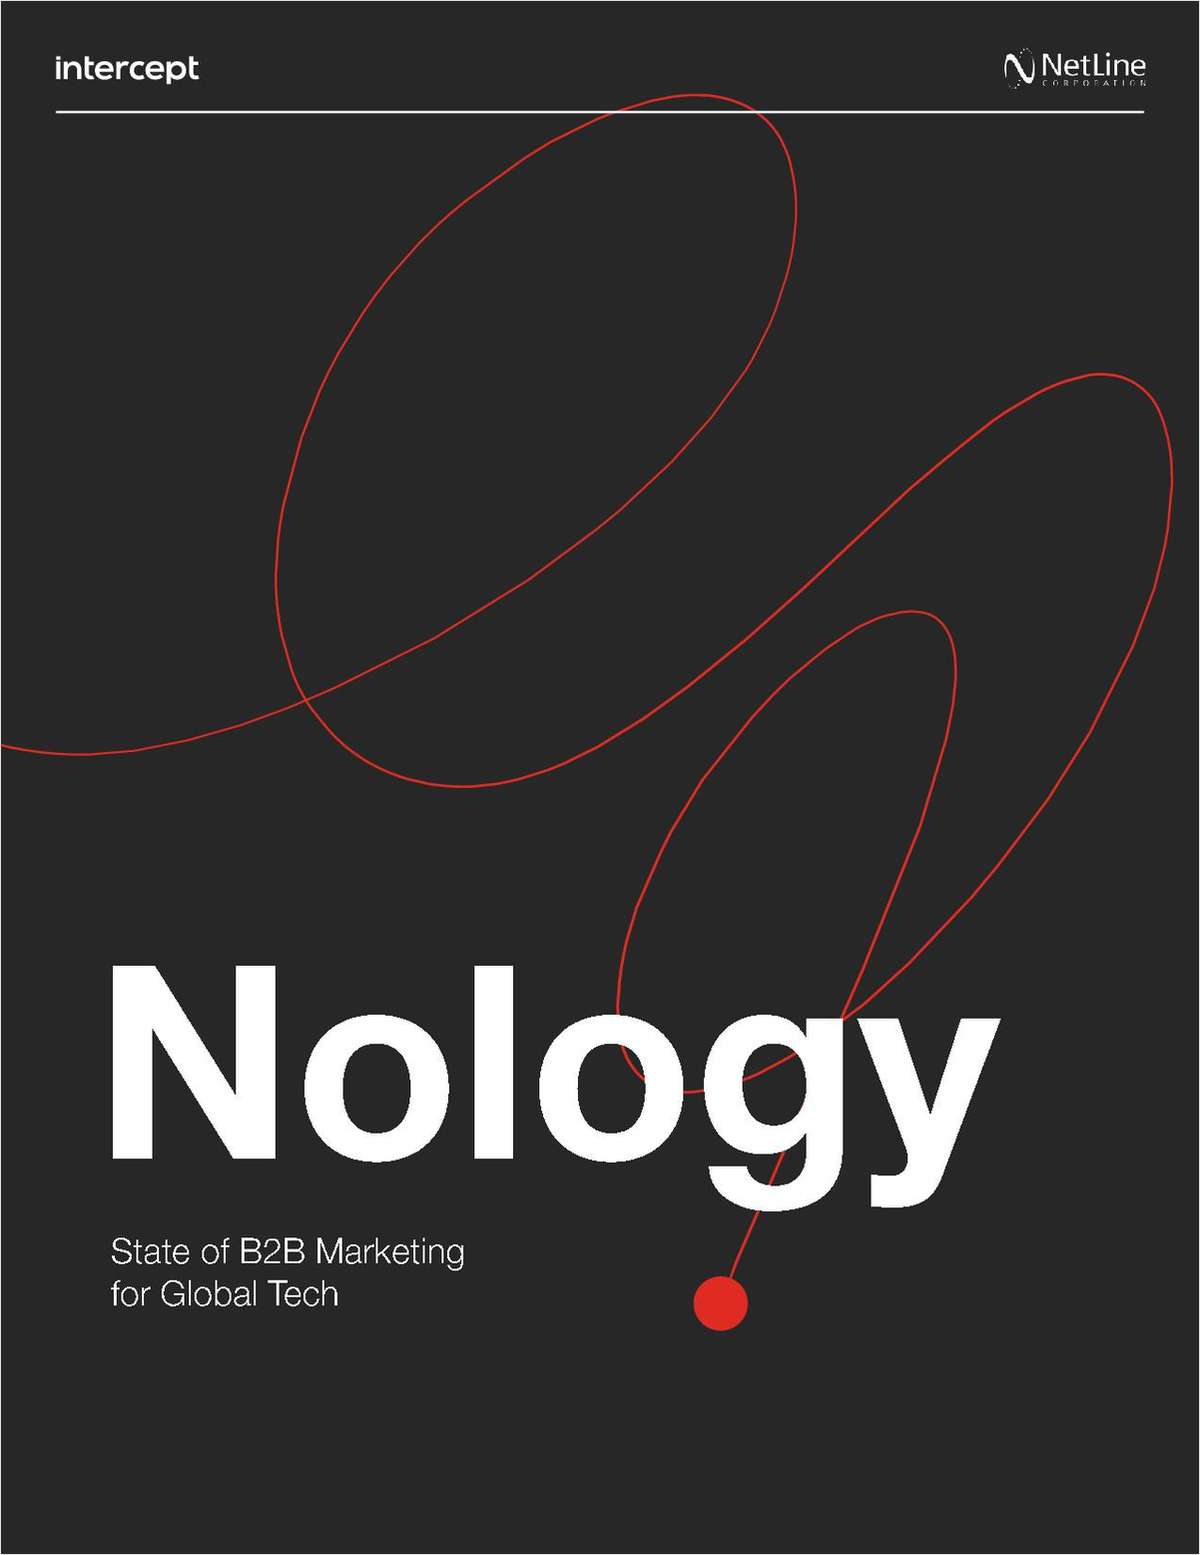 Nology - State of B2B Marketing for Global Tech